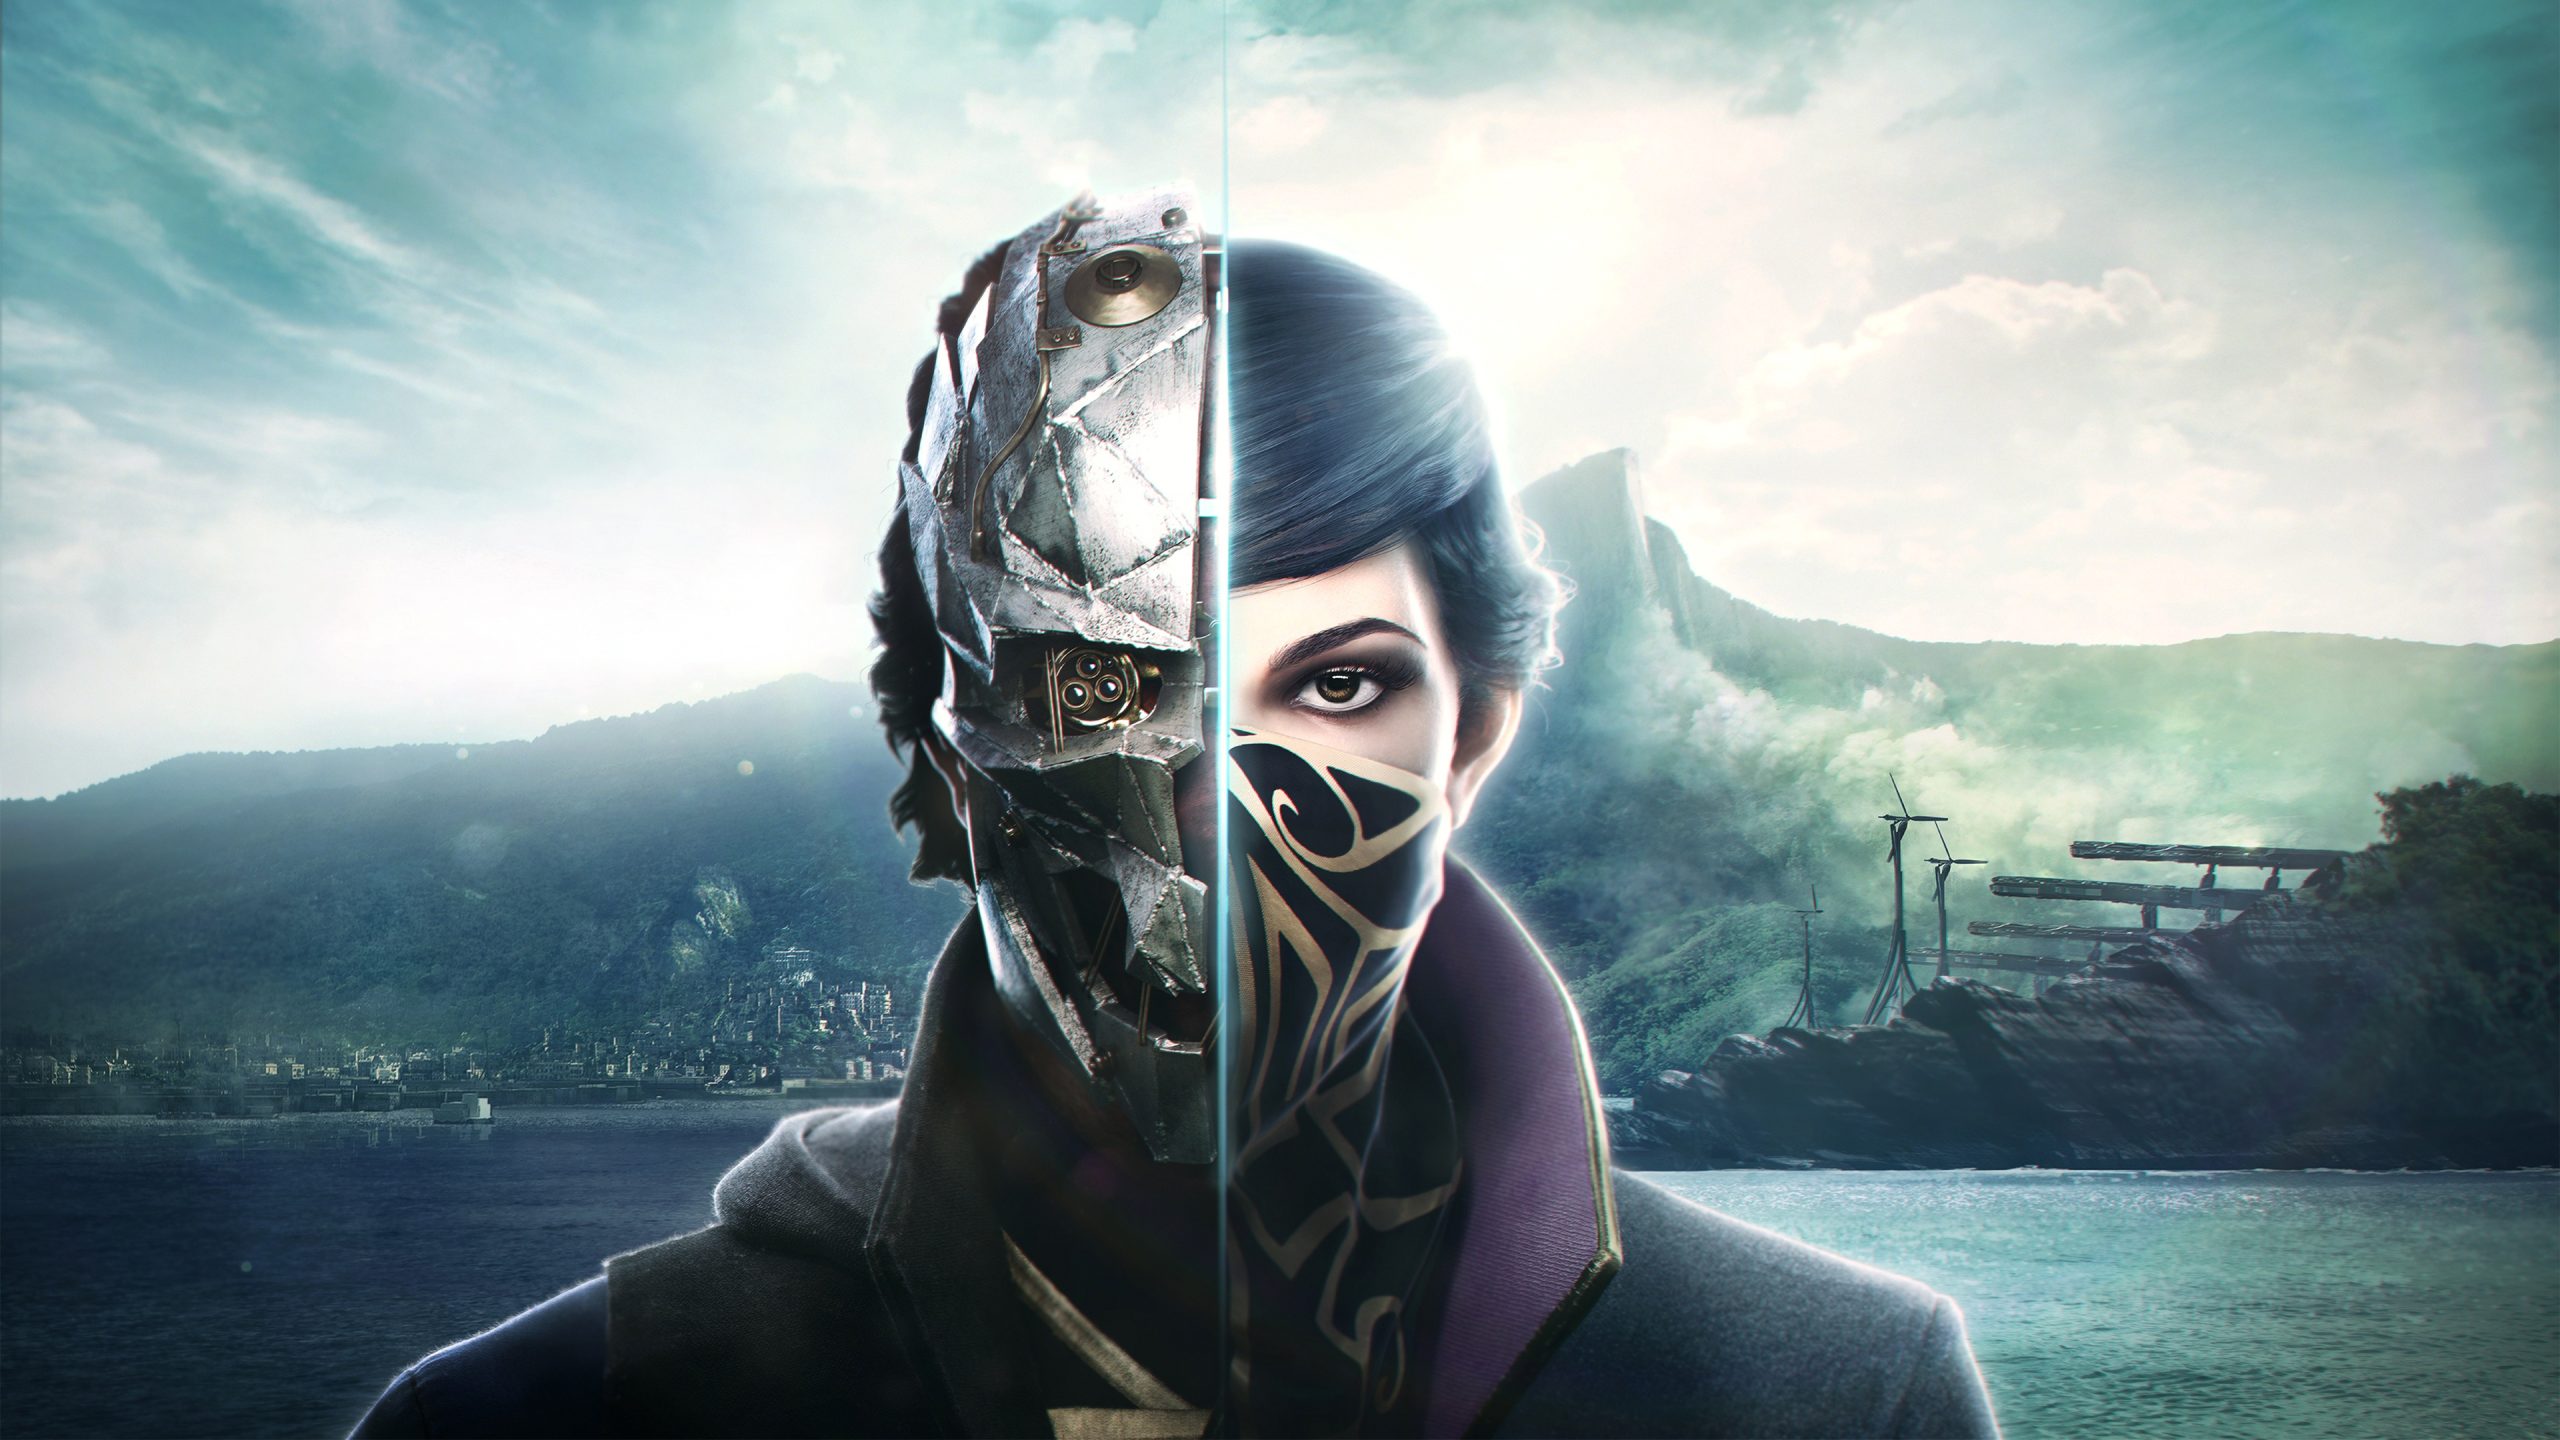 second dishonored